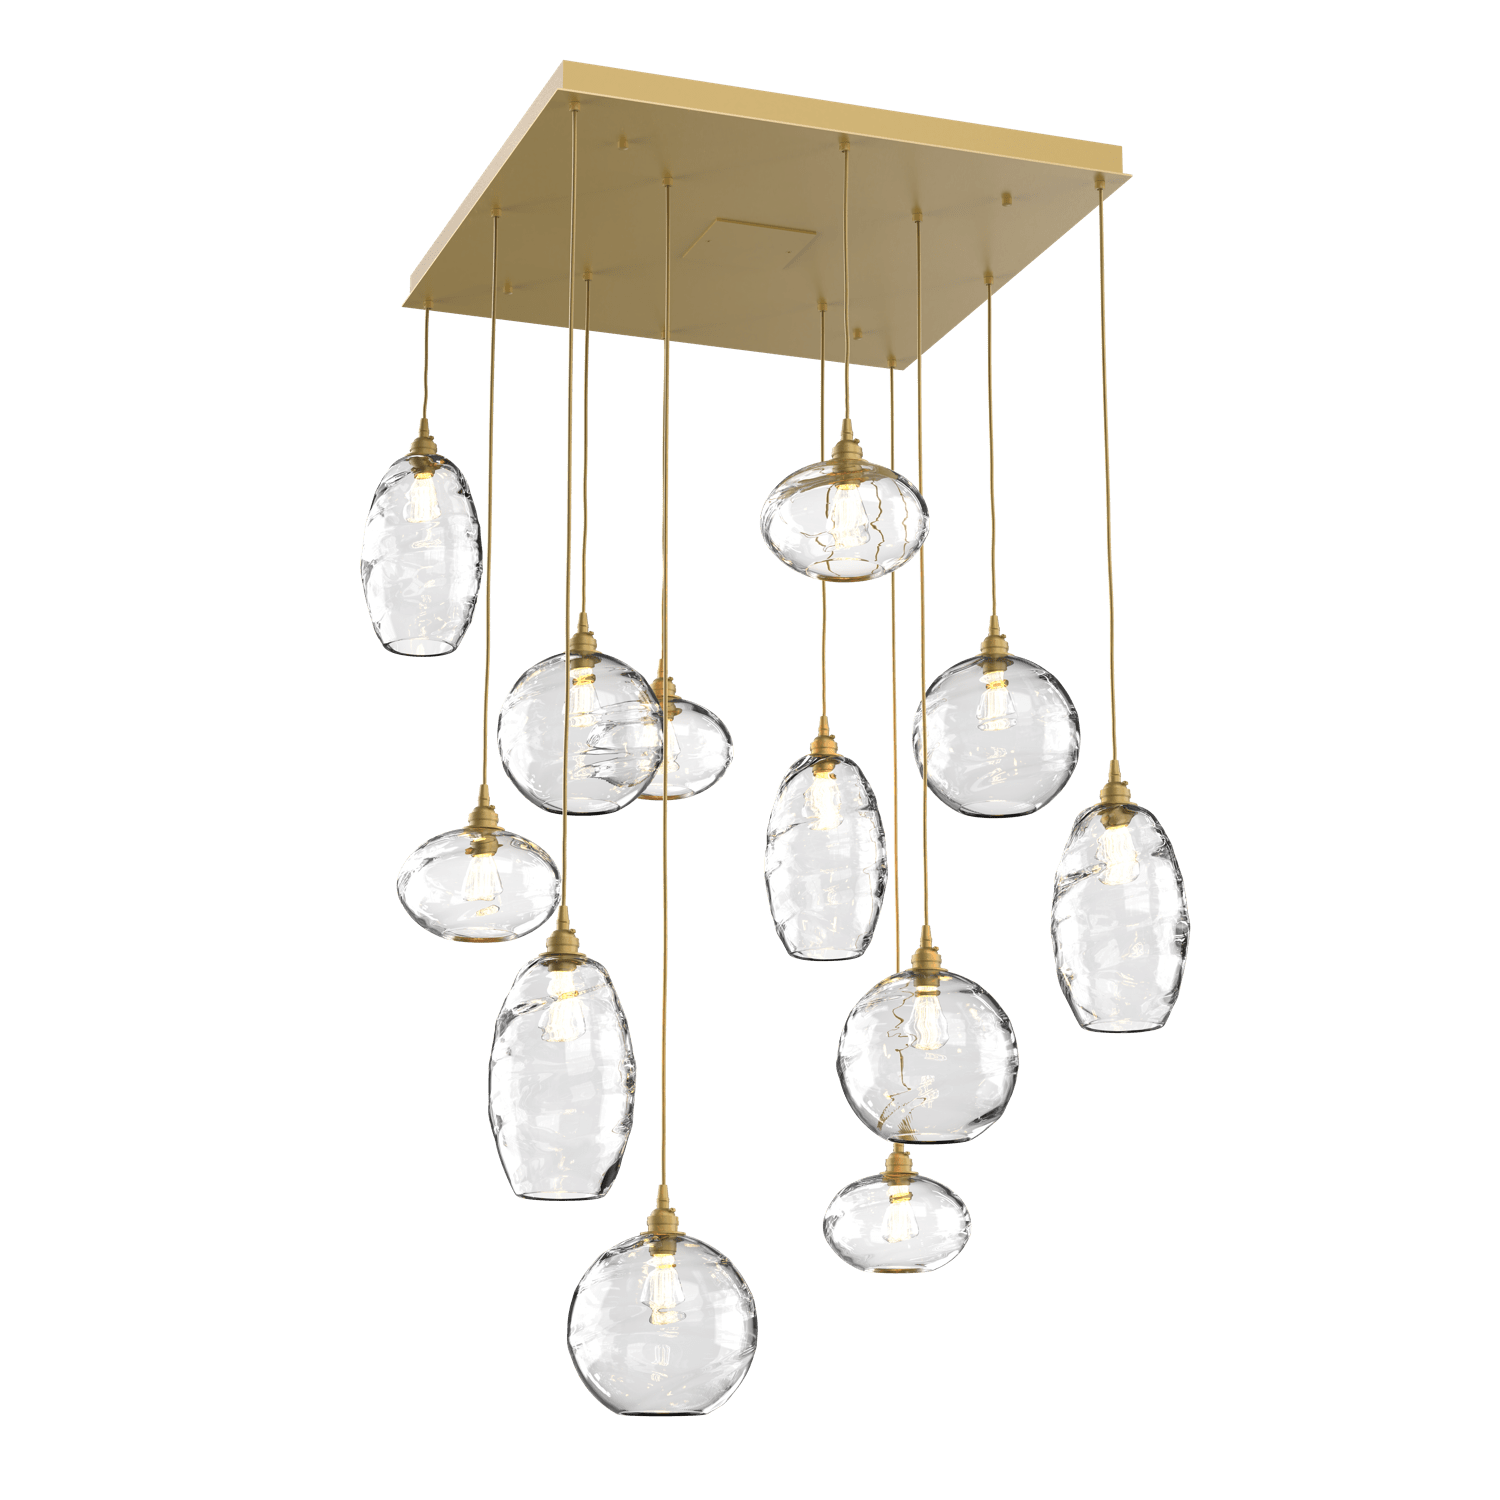 CHB0048-12-GB-OC-Hammerton-Studio-Optic-Blown-Glass-Misto-12-light-square-pendant-chandelier-with-gilded-brass-finish-and-optic-clear-blown-glass-shades-and-incandescent-lamping